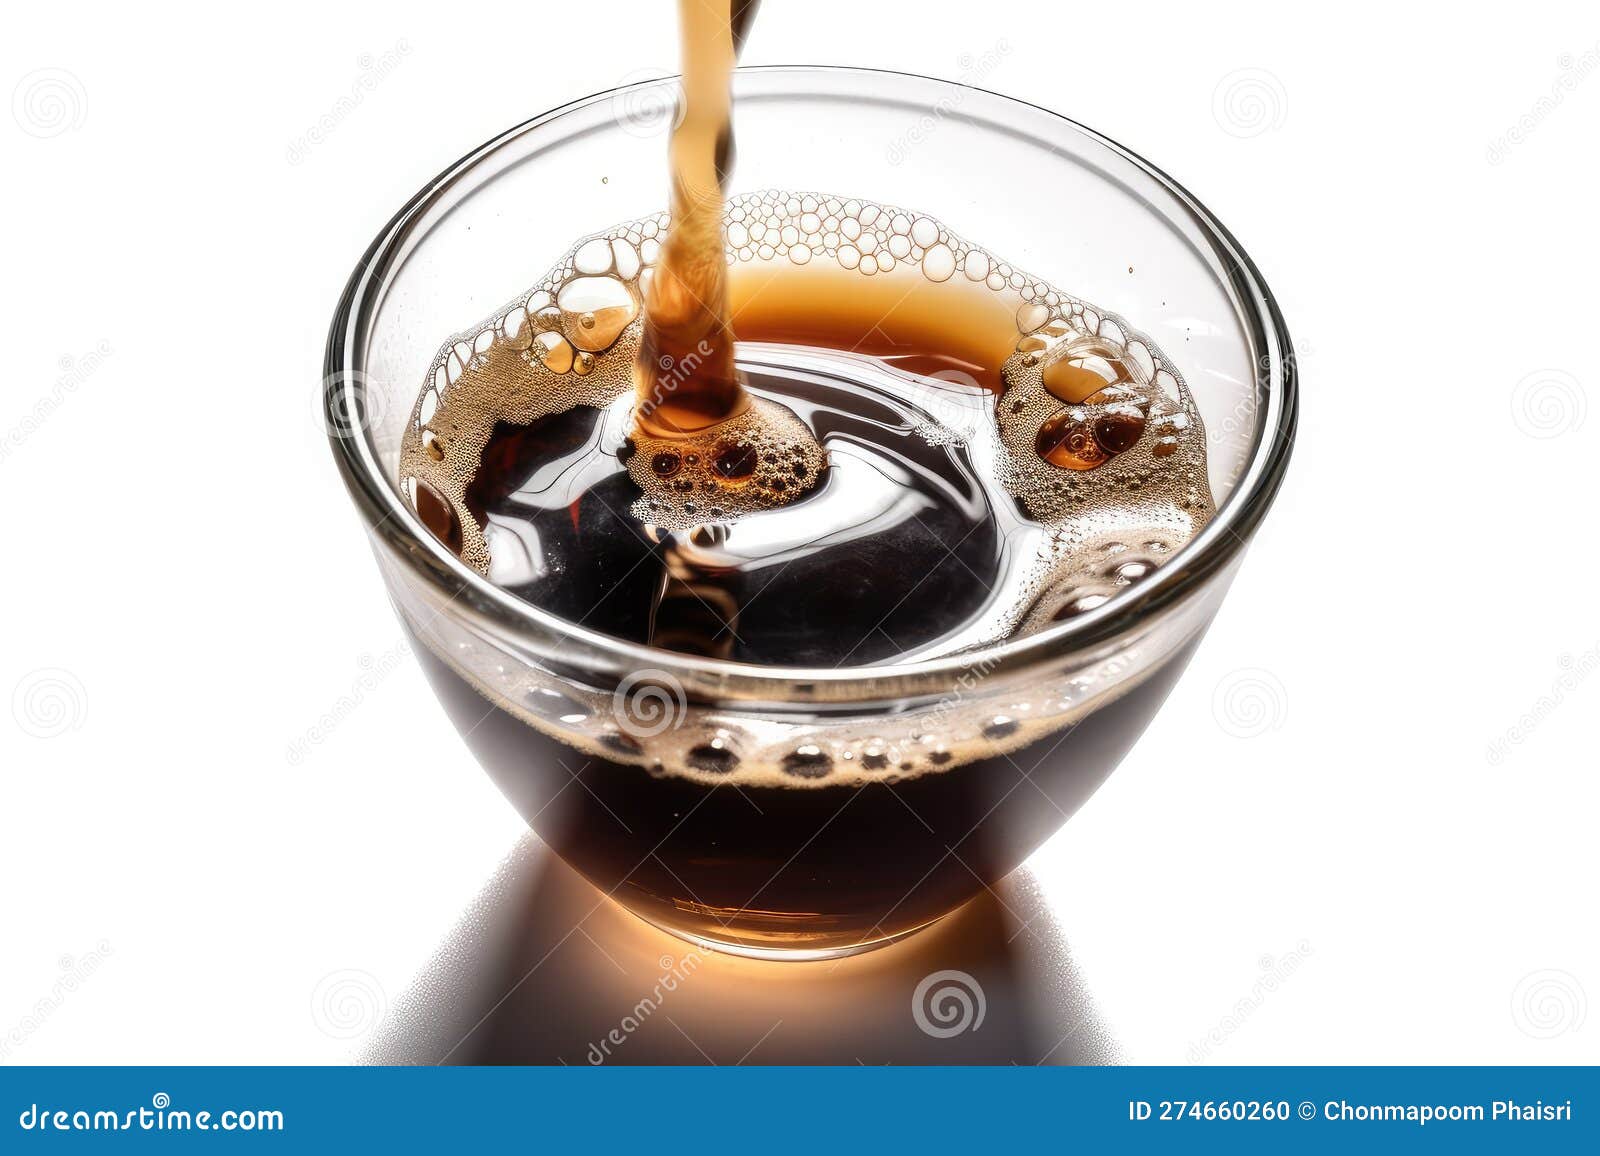 https://thumbs.dreamstime.com/z/americano-made-diluting-one-shot-espresso-hot-water-americano-classic-coffee-drink-made-adding-hot-274660260.jpg